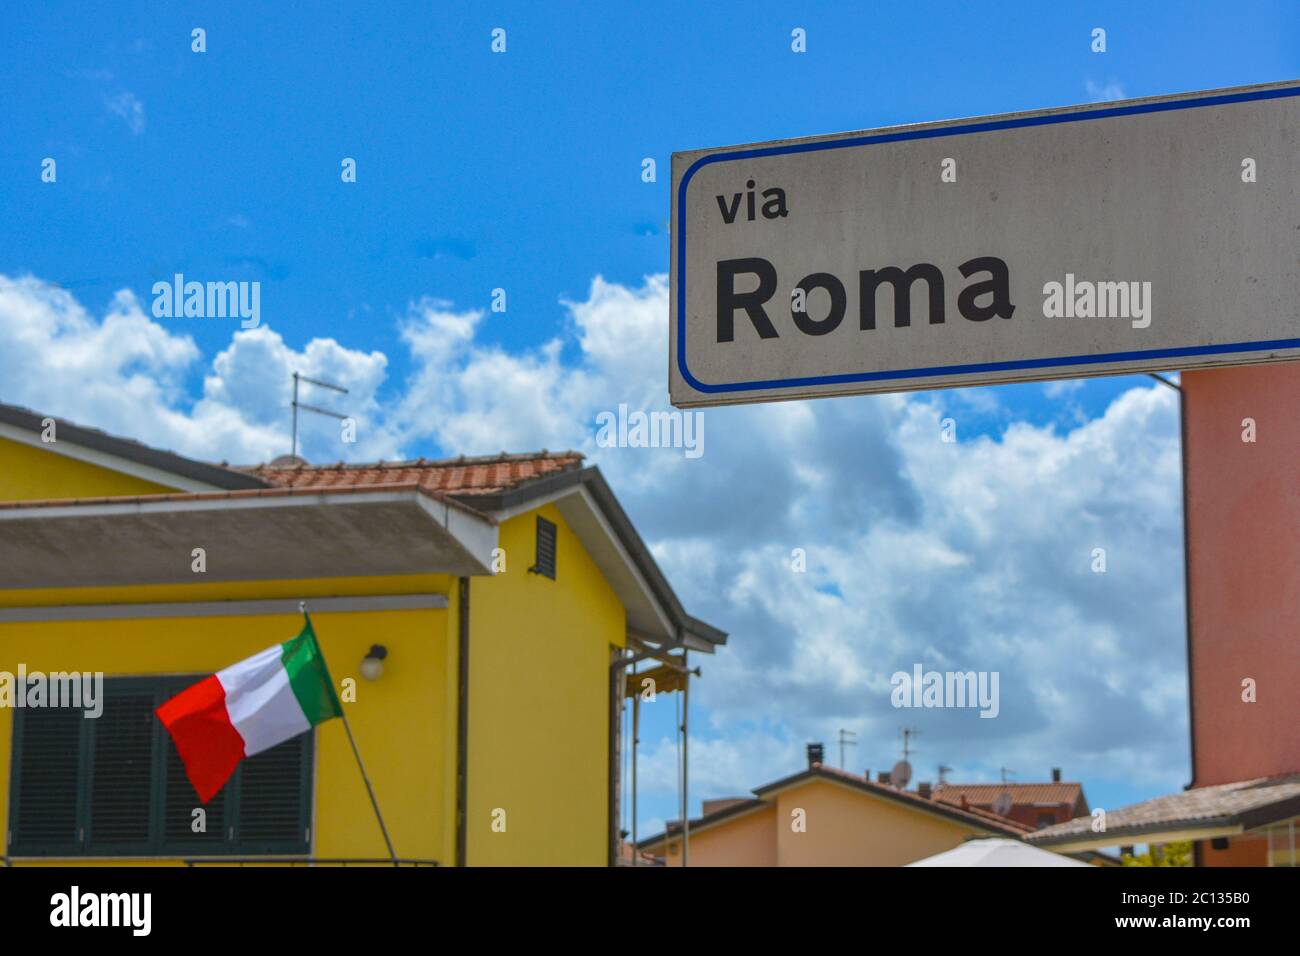 Patriotic scene from Italy: Rome street (Via Roma), the italian flag (tricolore) and a deep blue italian sky with typical mediterranean houses around Stock Photo